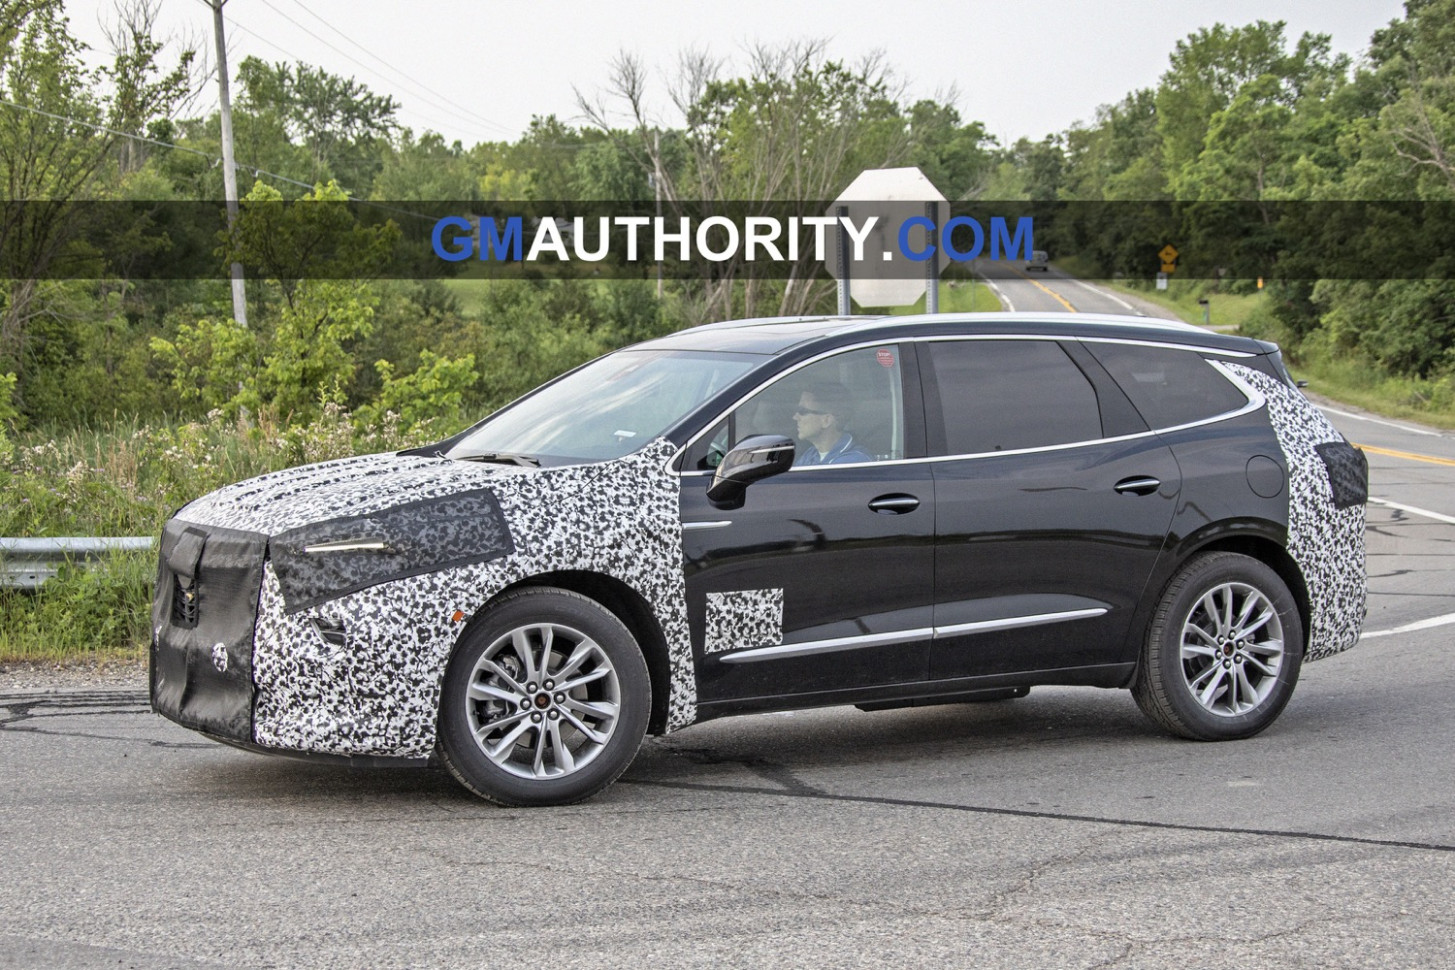 Research New 2022 Buick Enclave Spy Photos